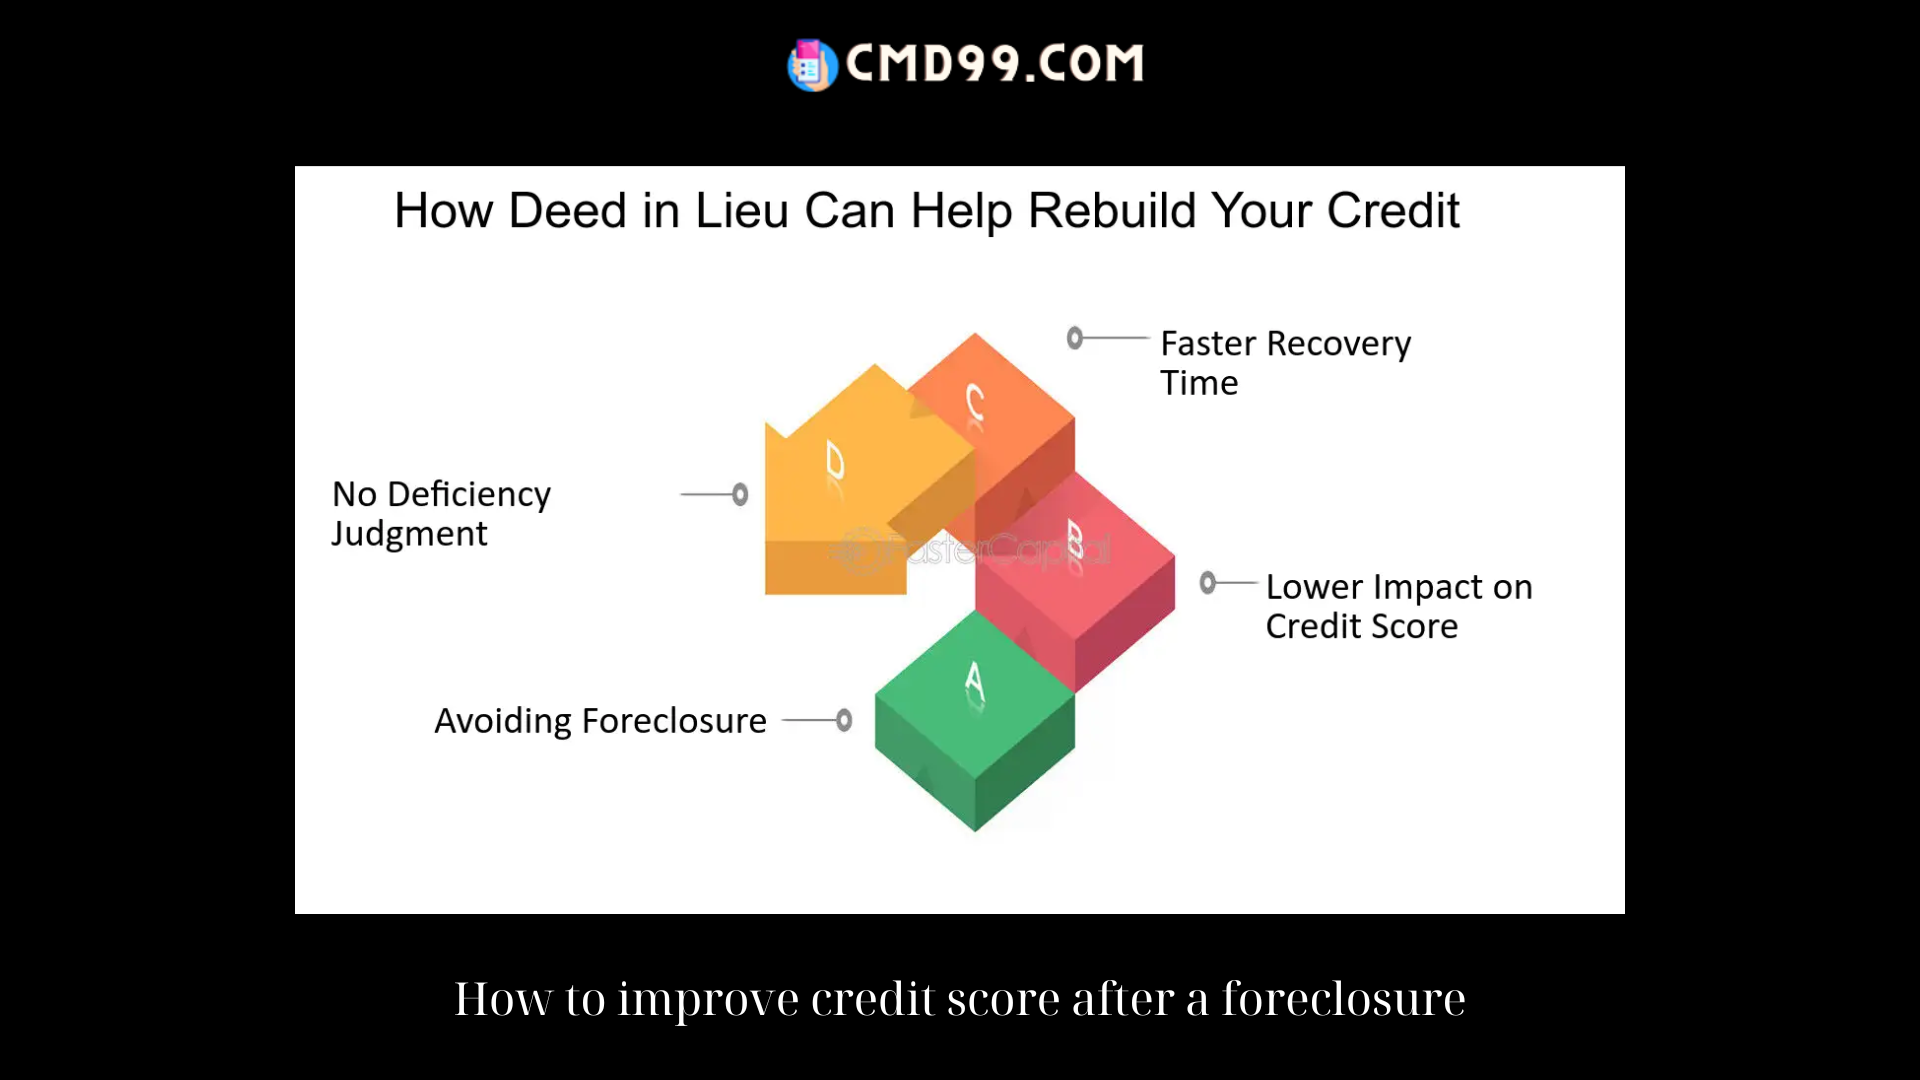 How to improve credit score after a foreclosure